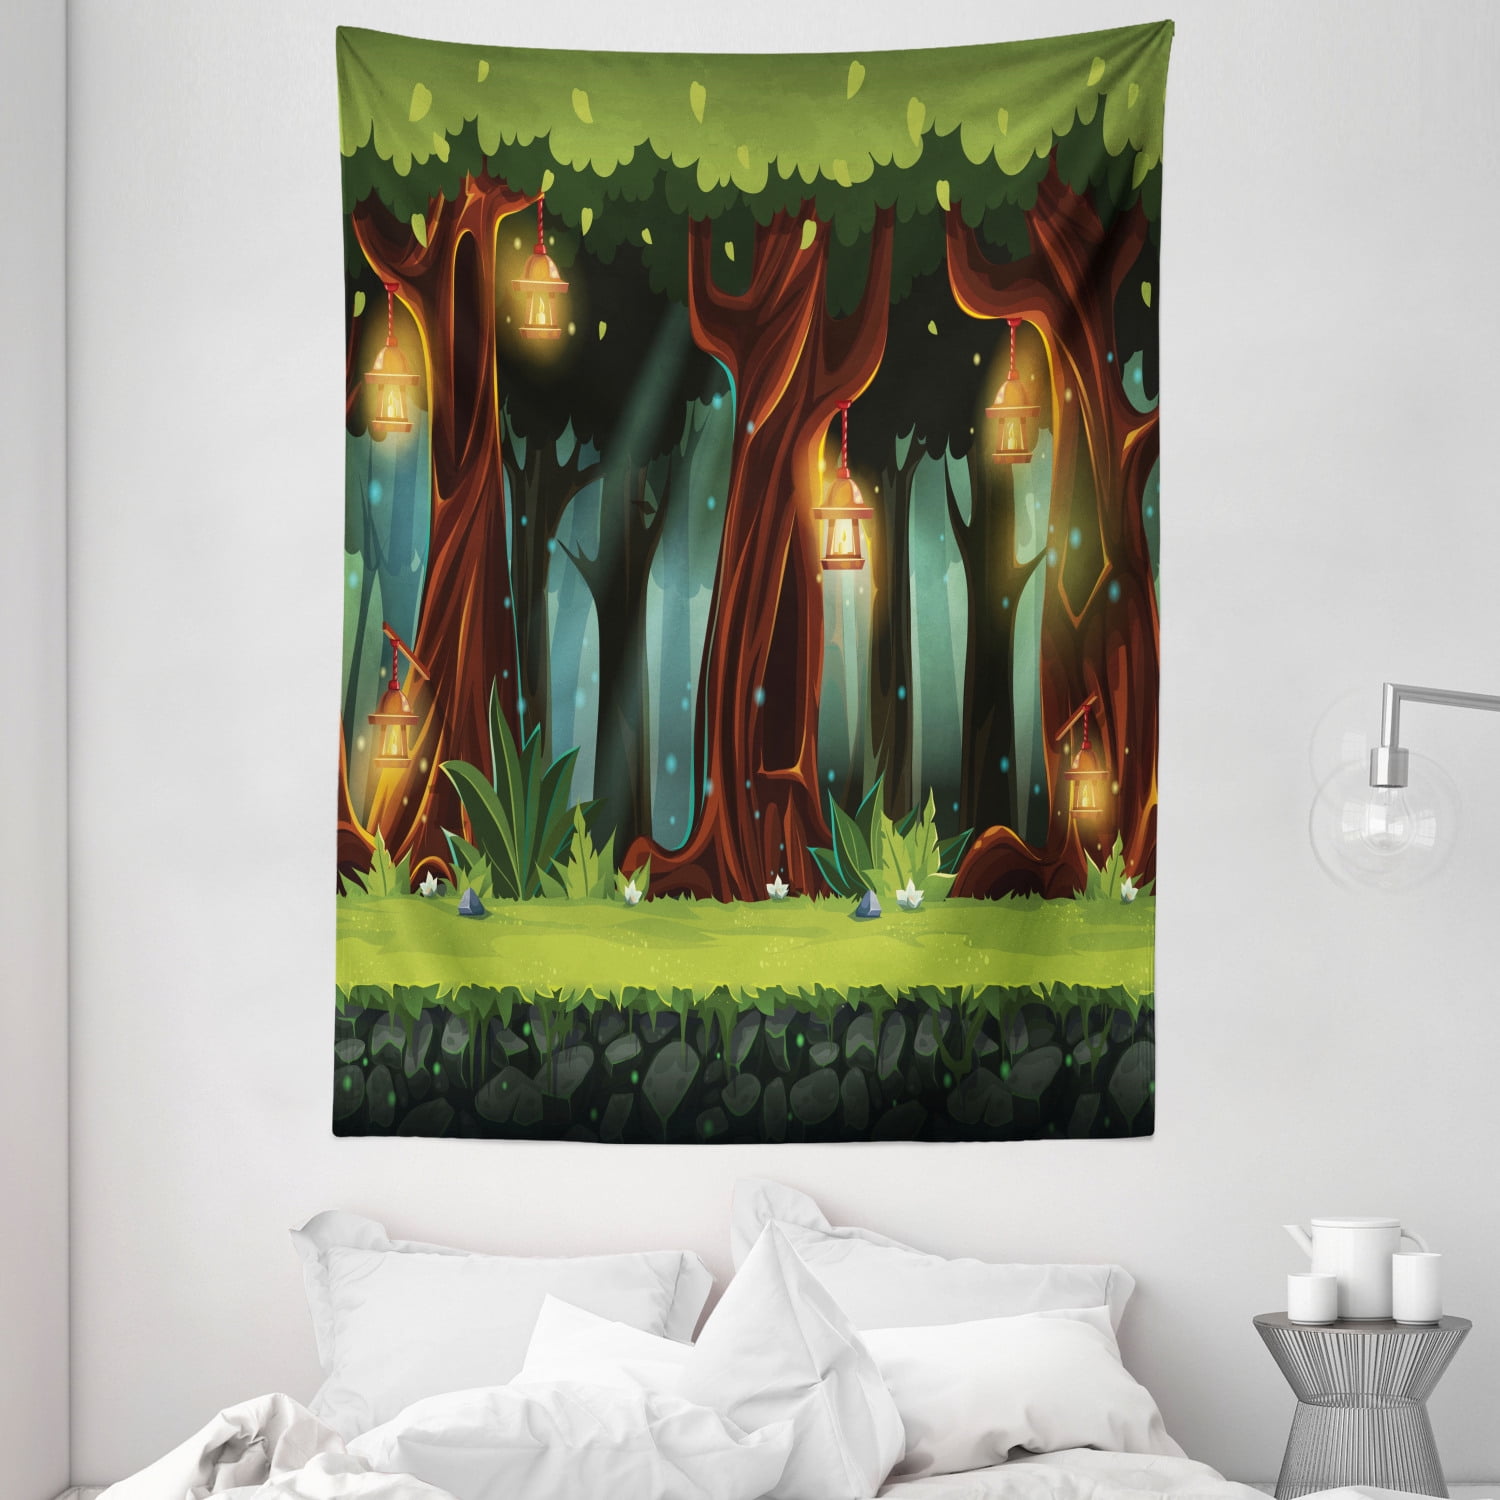 Fairy Tale Tapestry Enchanted Forest With Blossoming Trees Mystical Background Cartoon Landscape Wall Hanging For Bedroom Living Room Dorm Decor 60w X 80l Inches Multicolor By Ambesonne Walmart Com Walmart Com